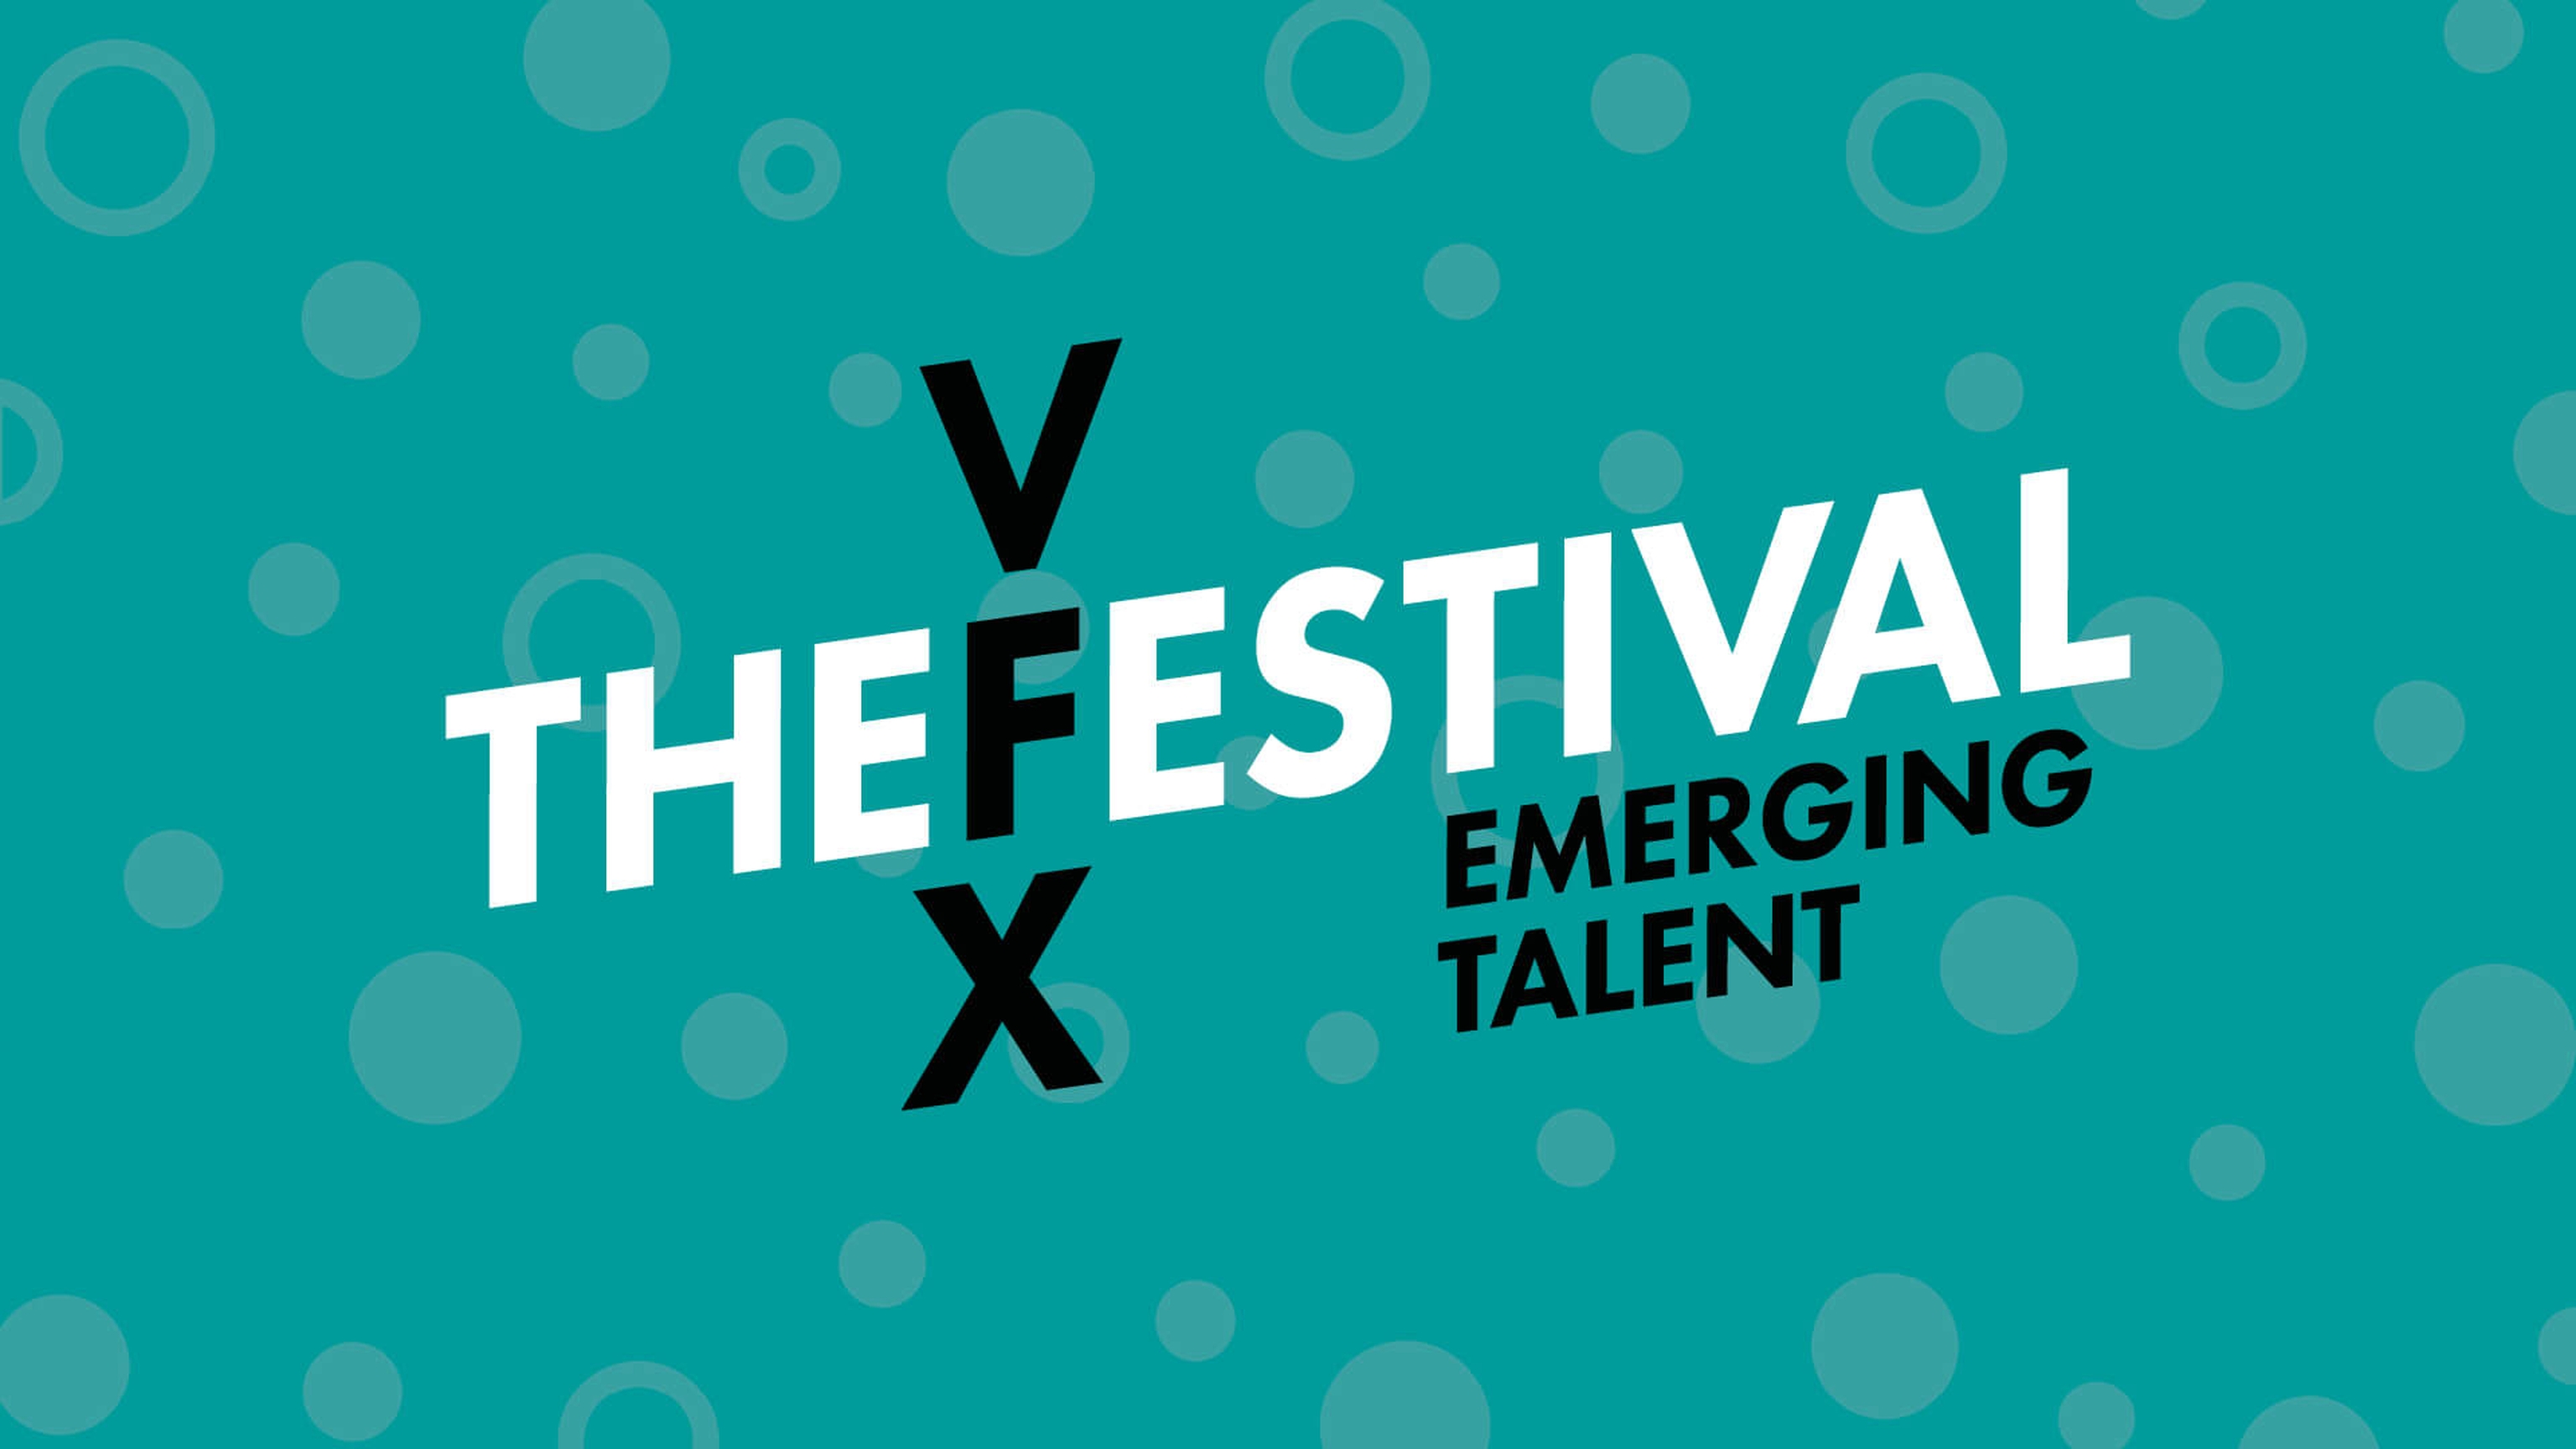 The VFX Festival emerging talent logo on a teal background